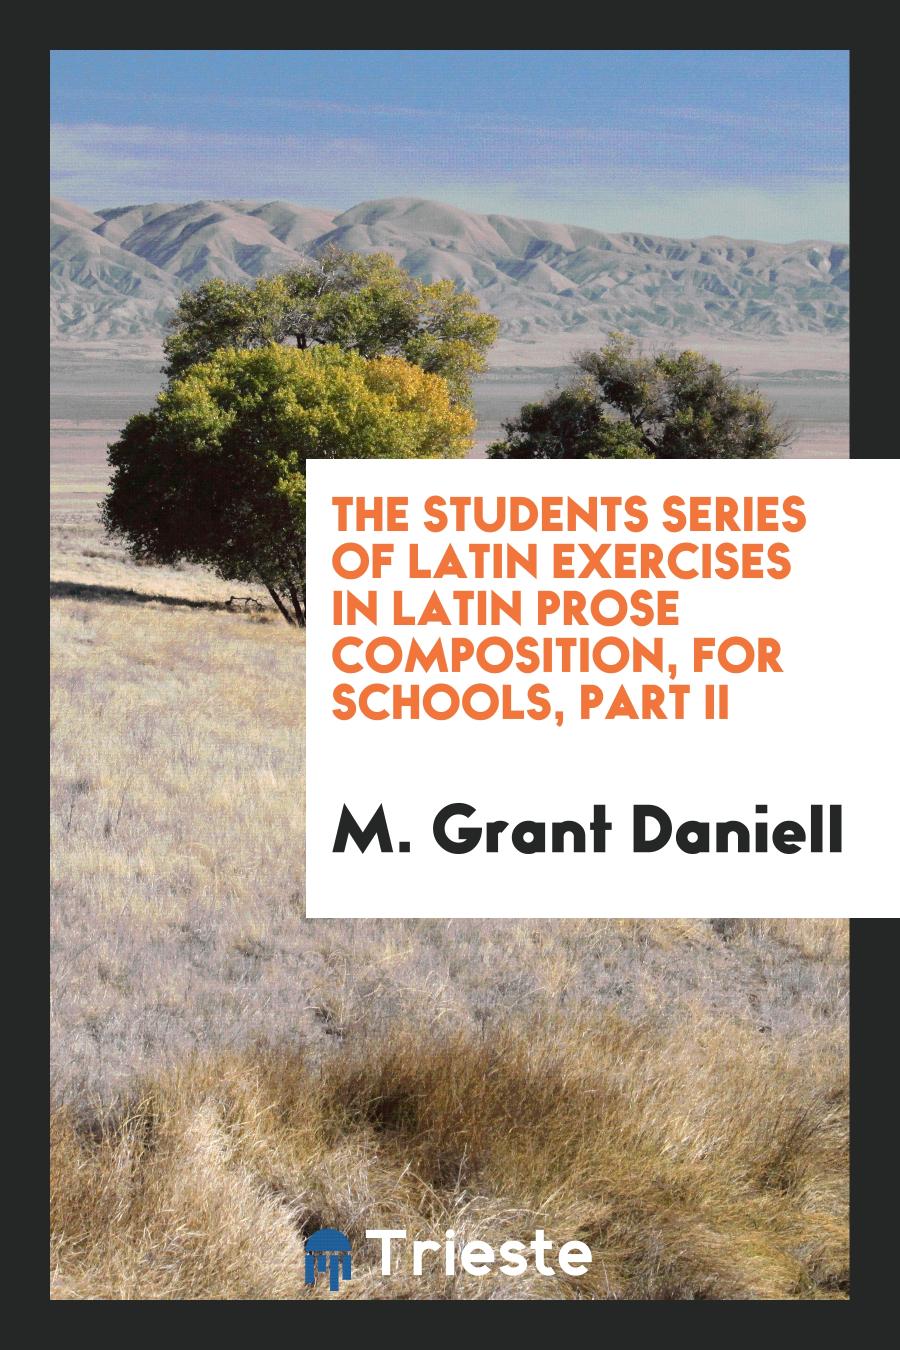 The students series of Latin Exercises in Latin Prose Composition, For Schools, part II